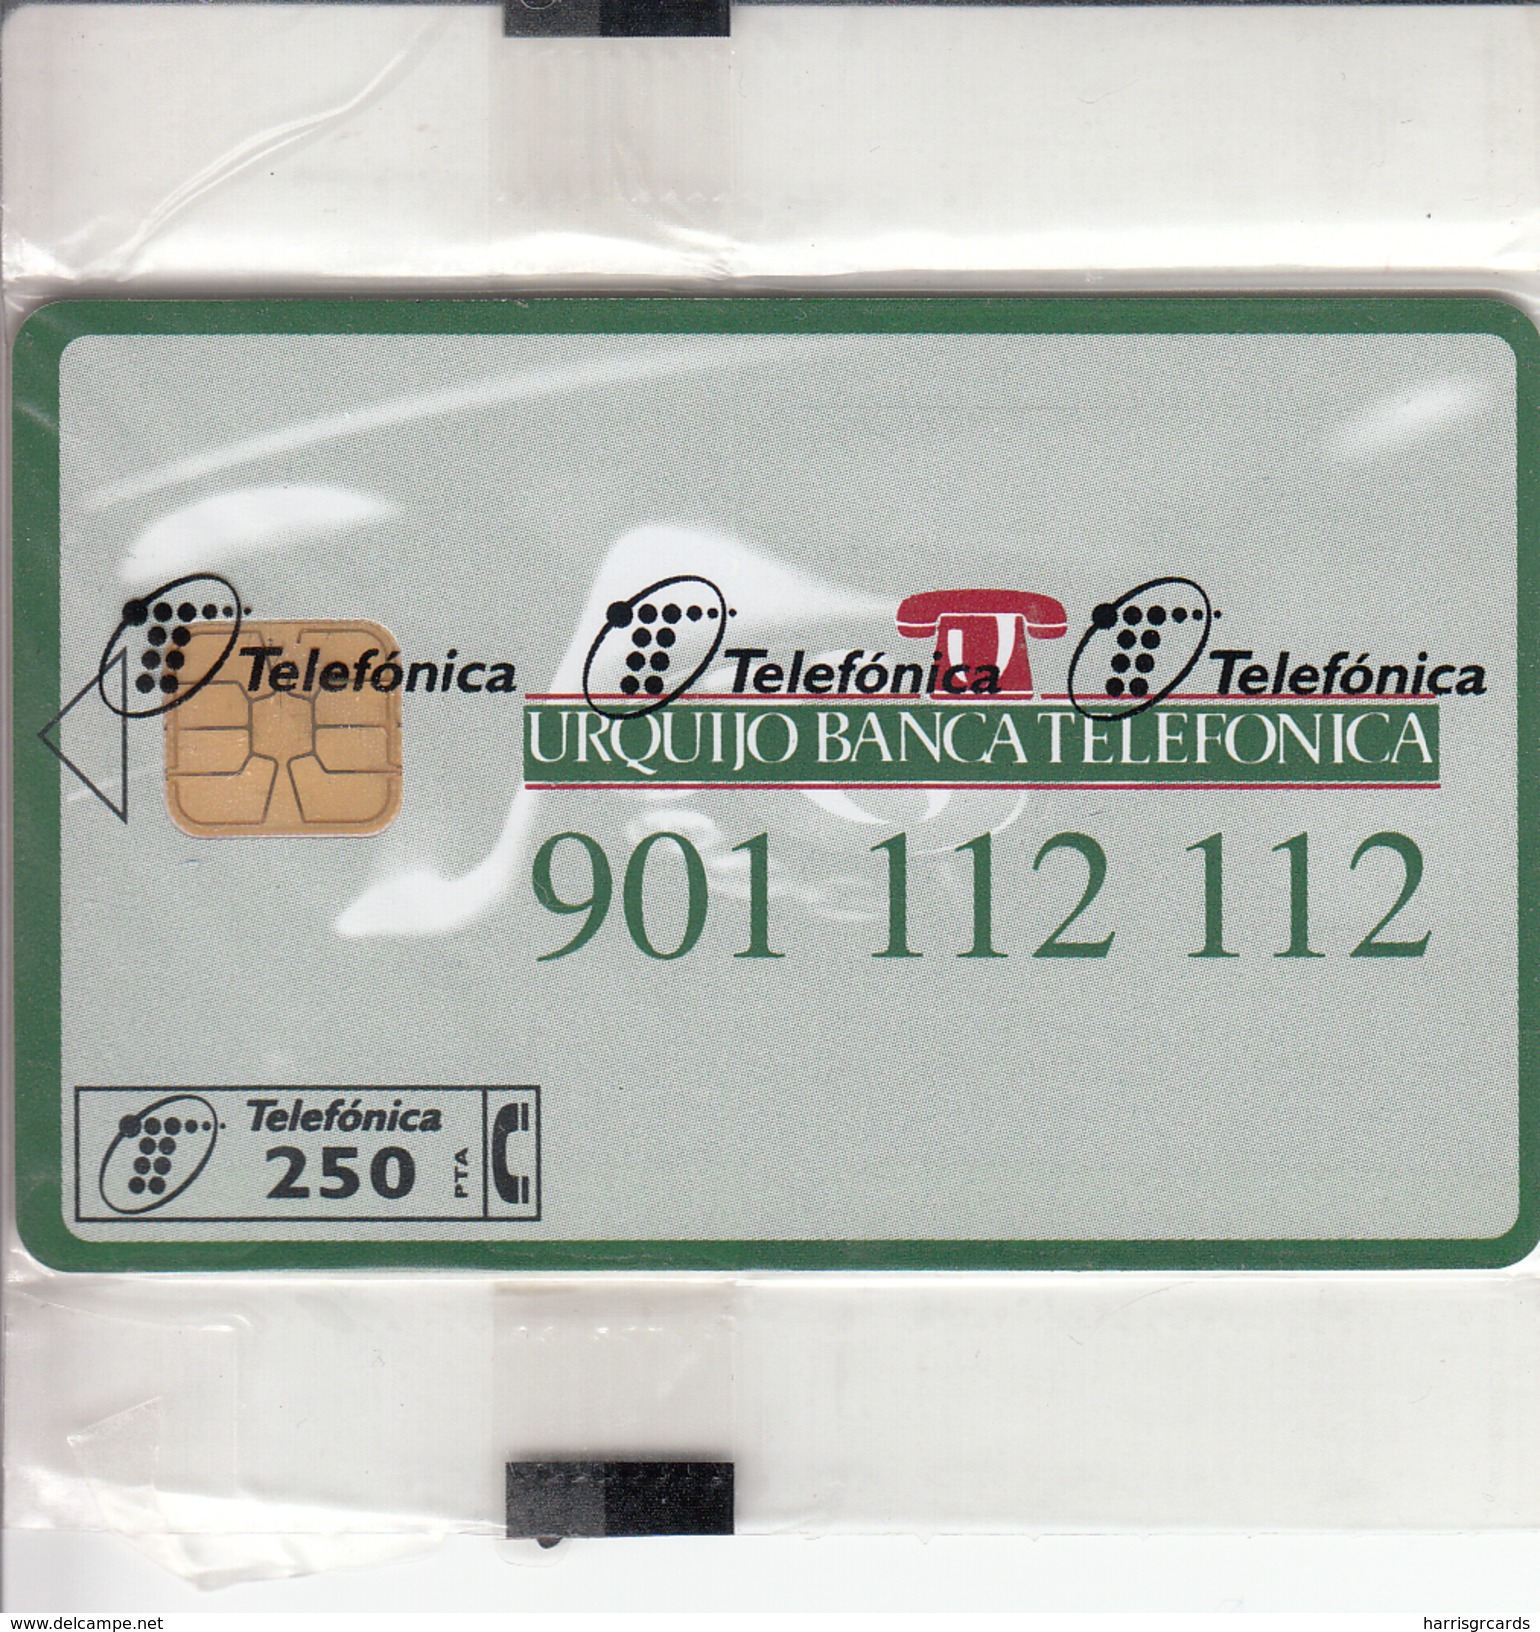 SPAIN - Urquijo Banca Telefonica, P-190, 03/96, Tirage 5.000, Mint - Private Issues